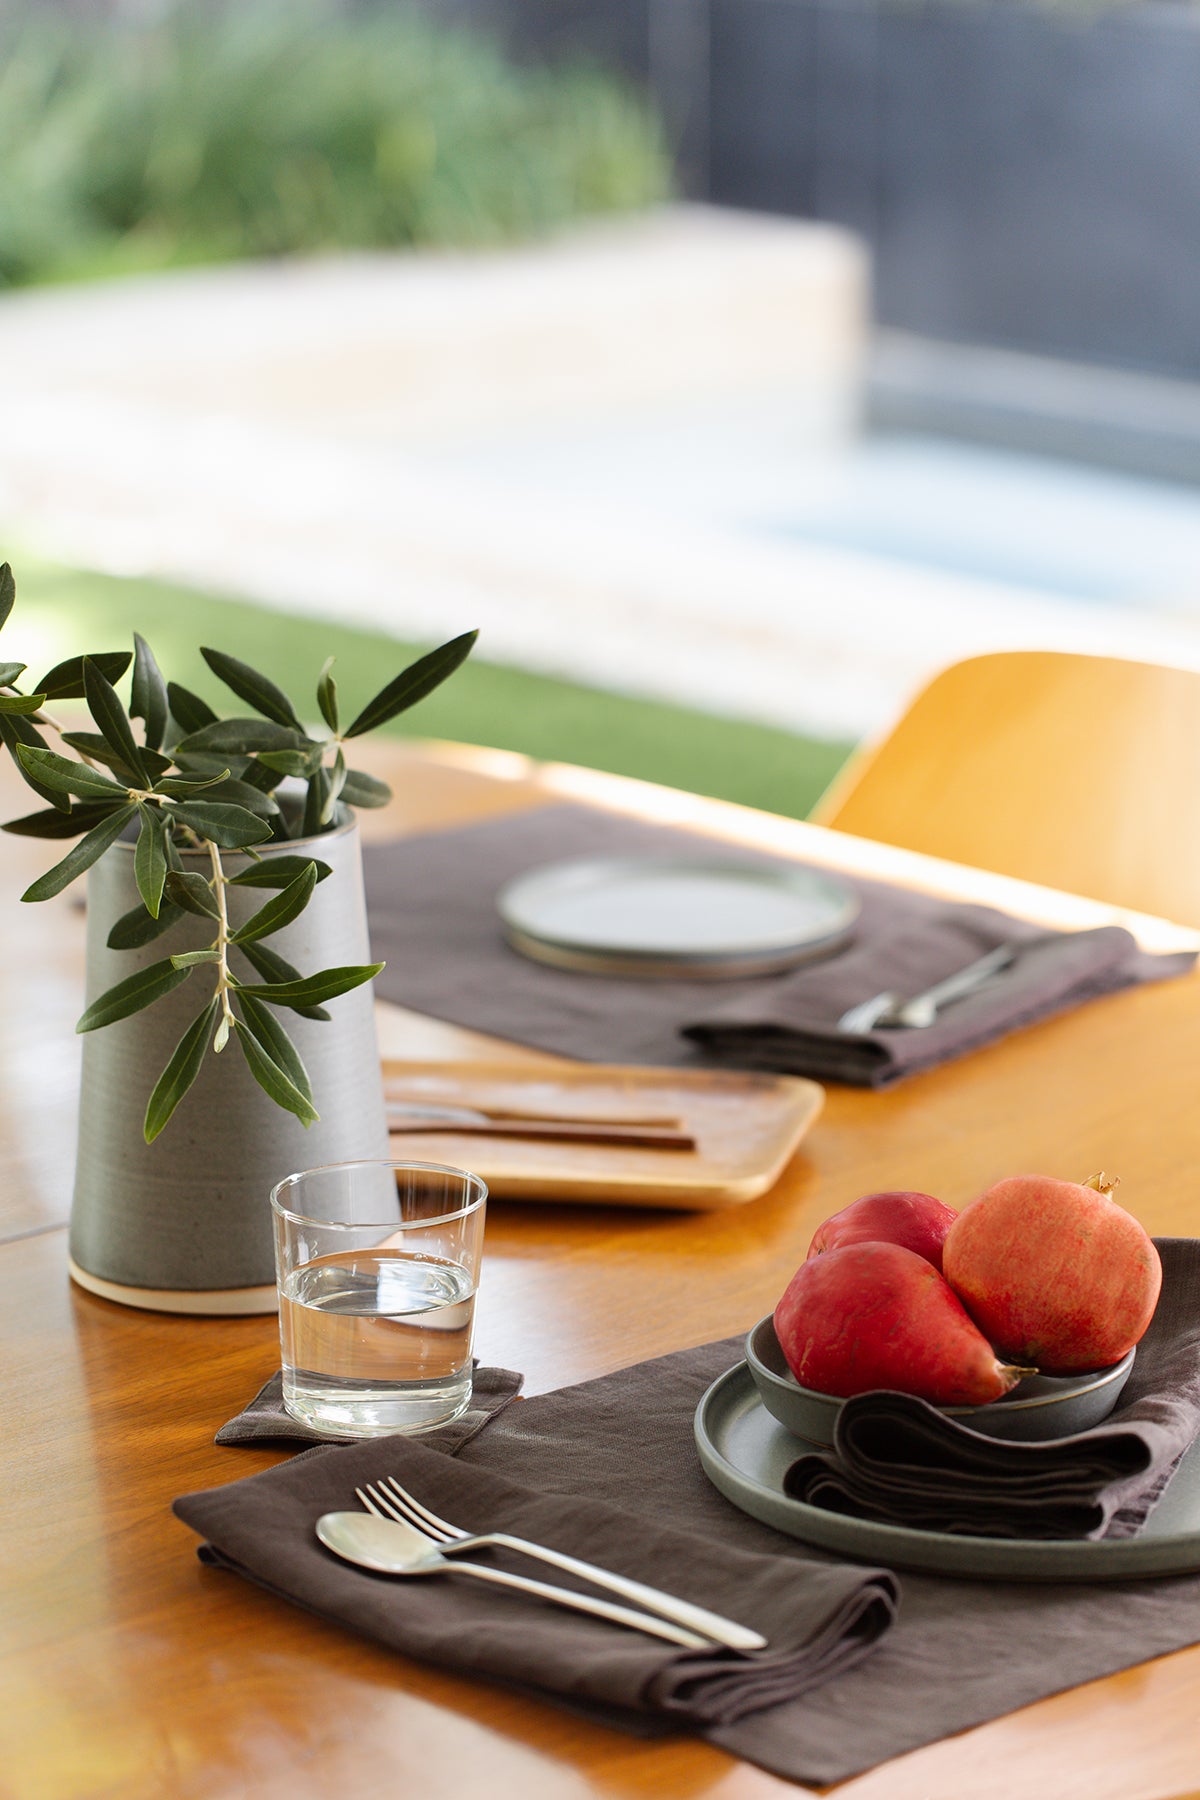 A Jenny Graham Home linen placemat on a table accessorizes the scene next to a bowl of peaches.-14899243319489